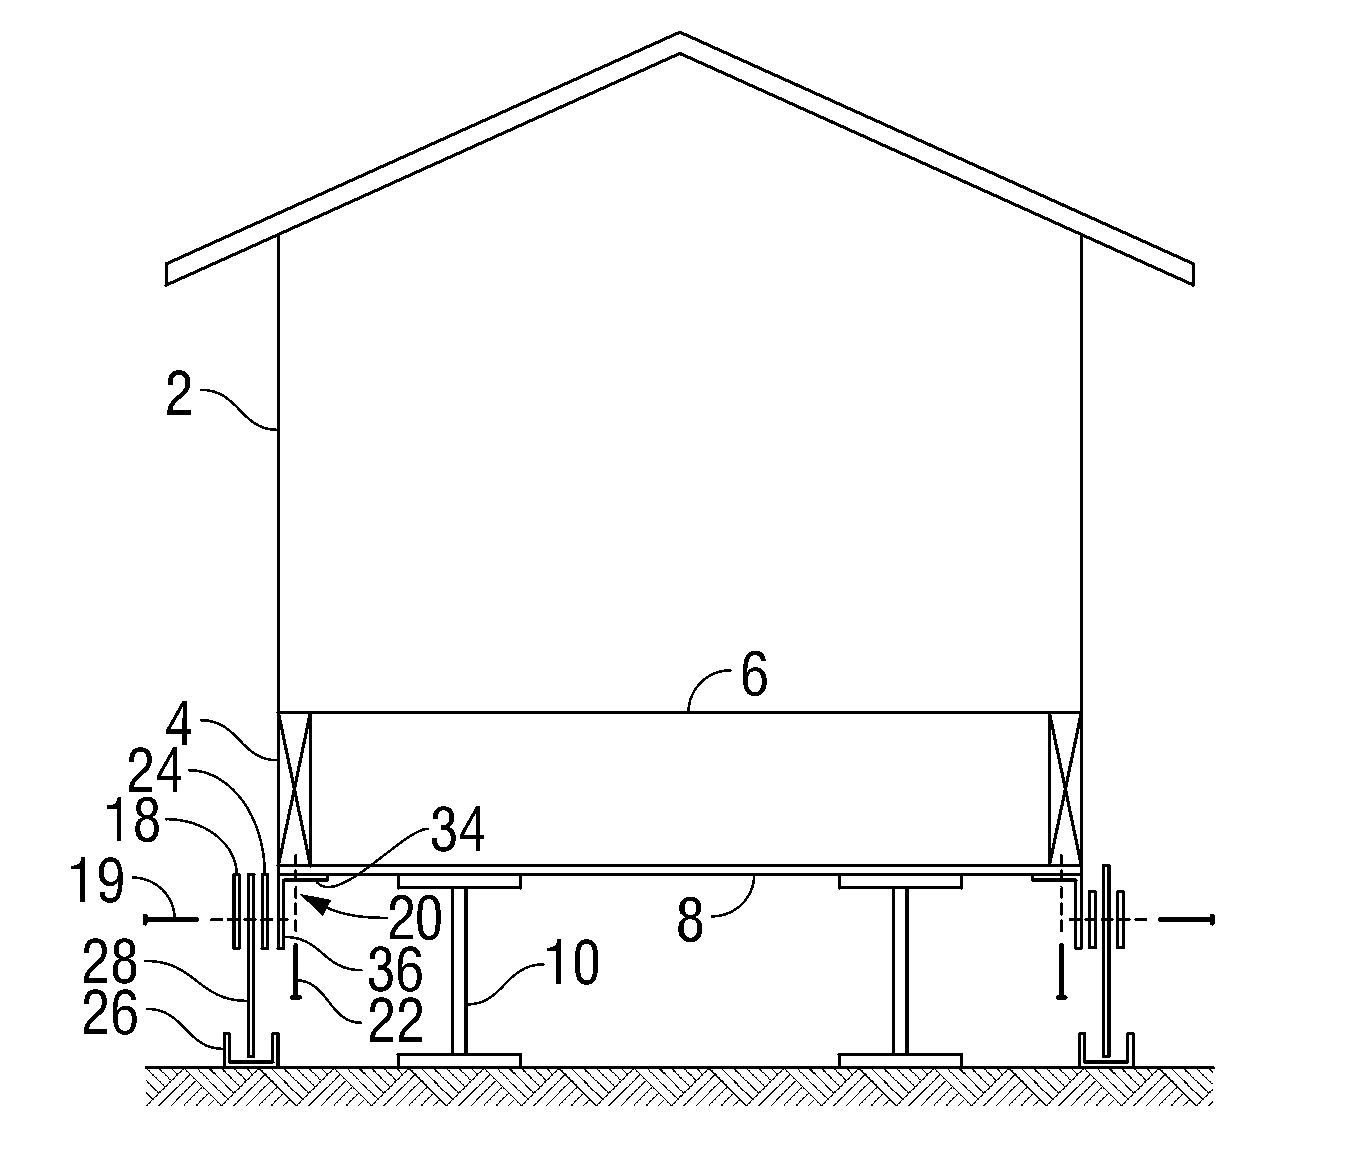 System and Method for Skirting a Manufactured Home